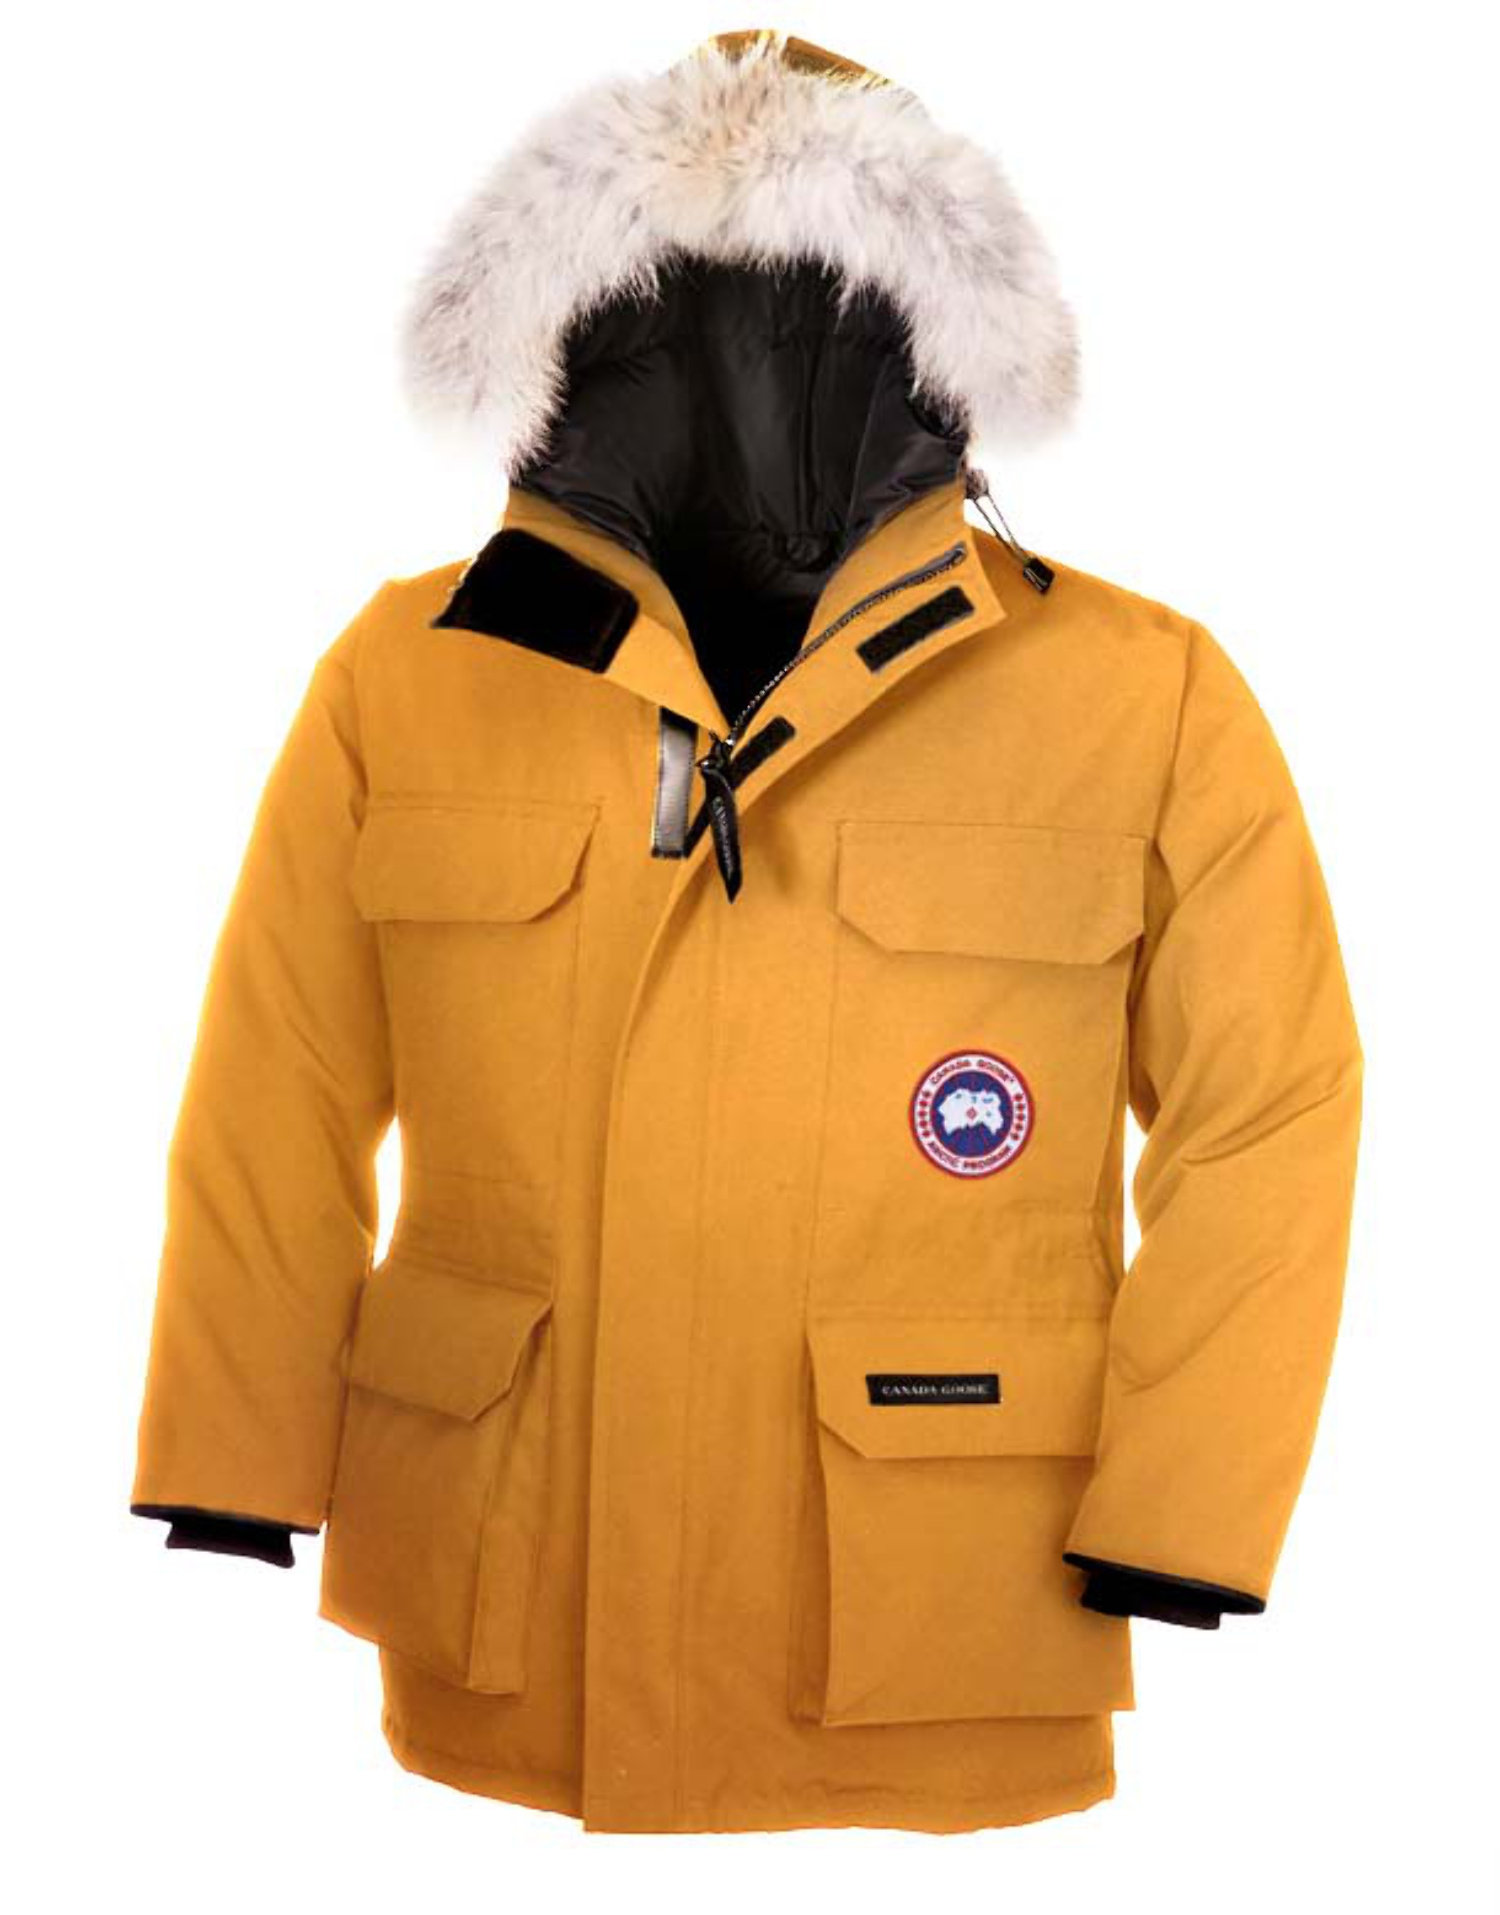 Canada Goose chateau parka outlet store - Canada Goose Expedition Parka Jackets Kids Yellow www ...